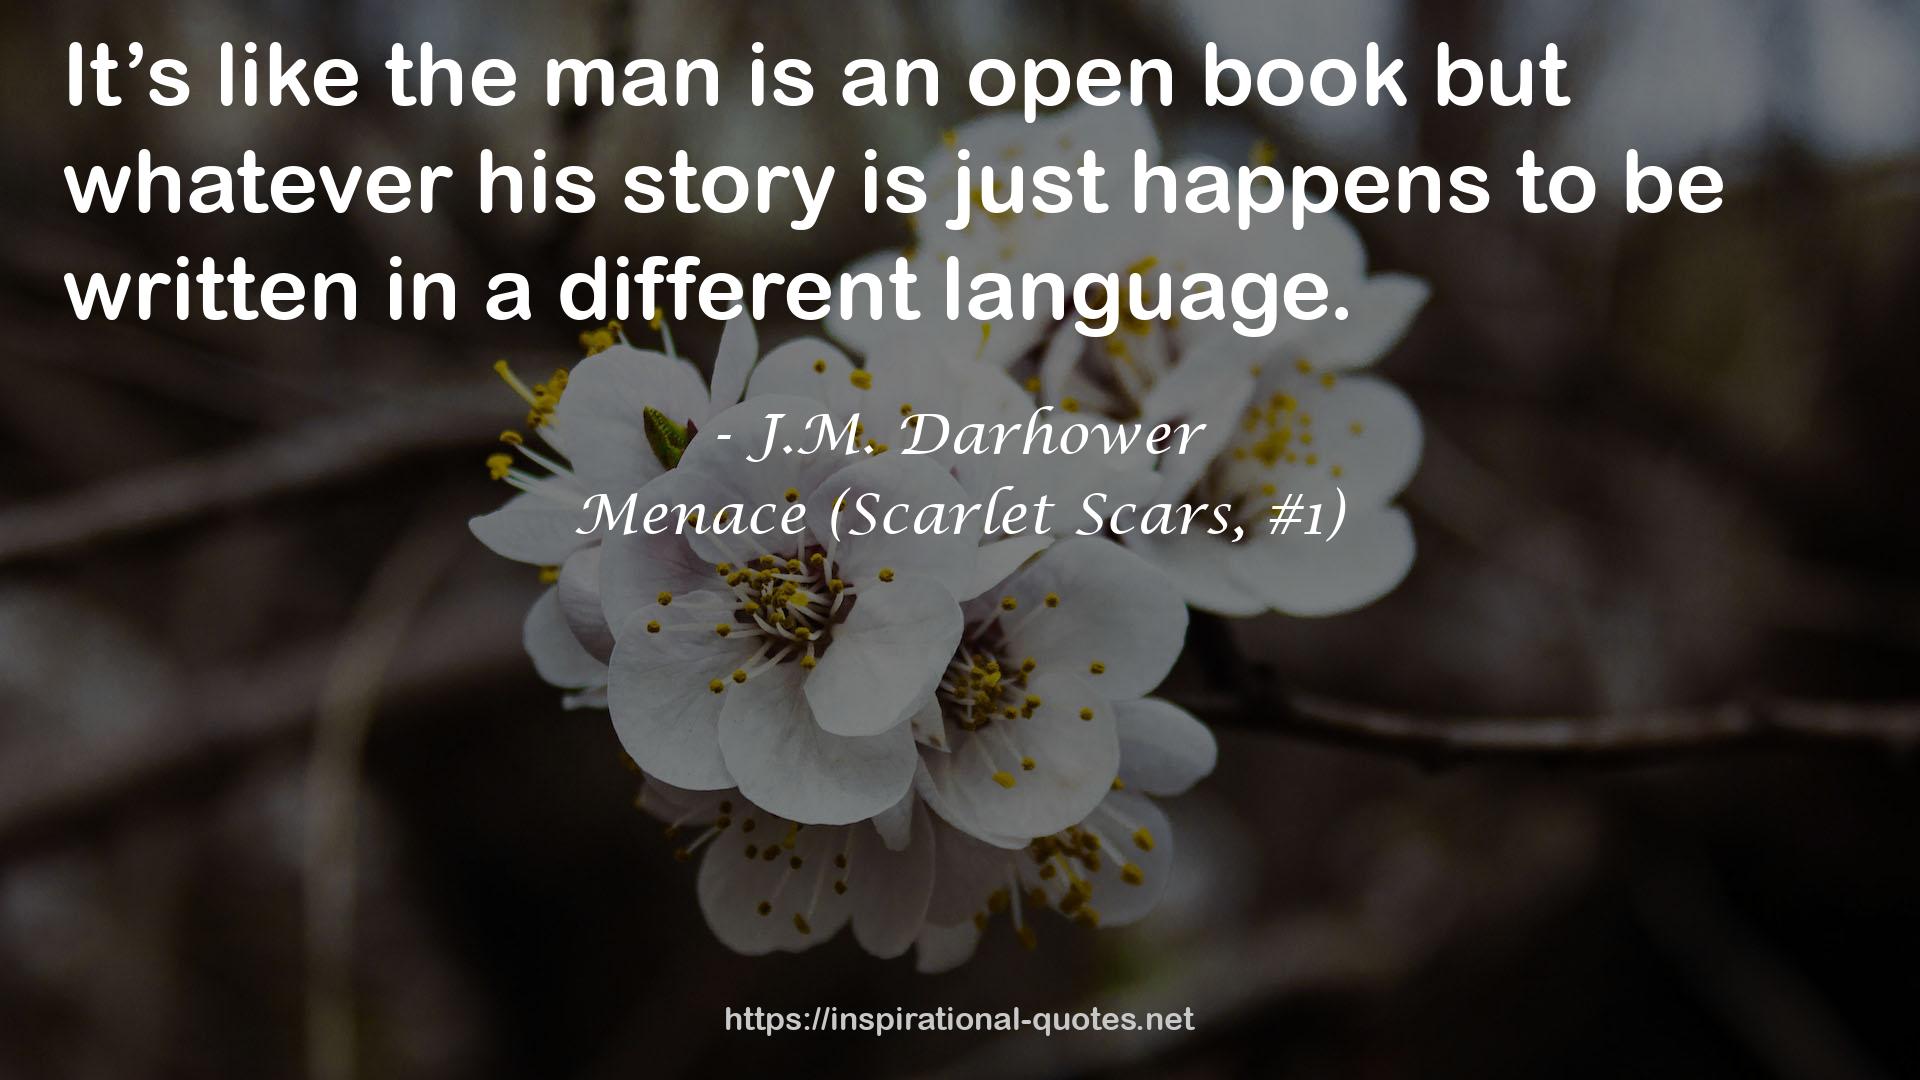 Menace (Scarlet Scars, #1) QUOTES